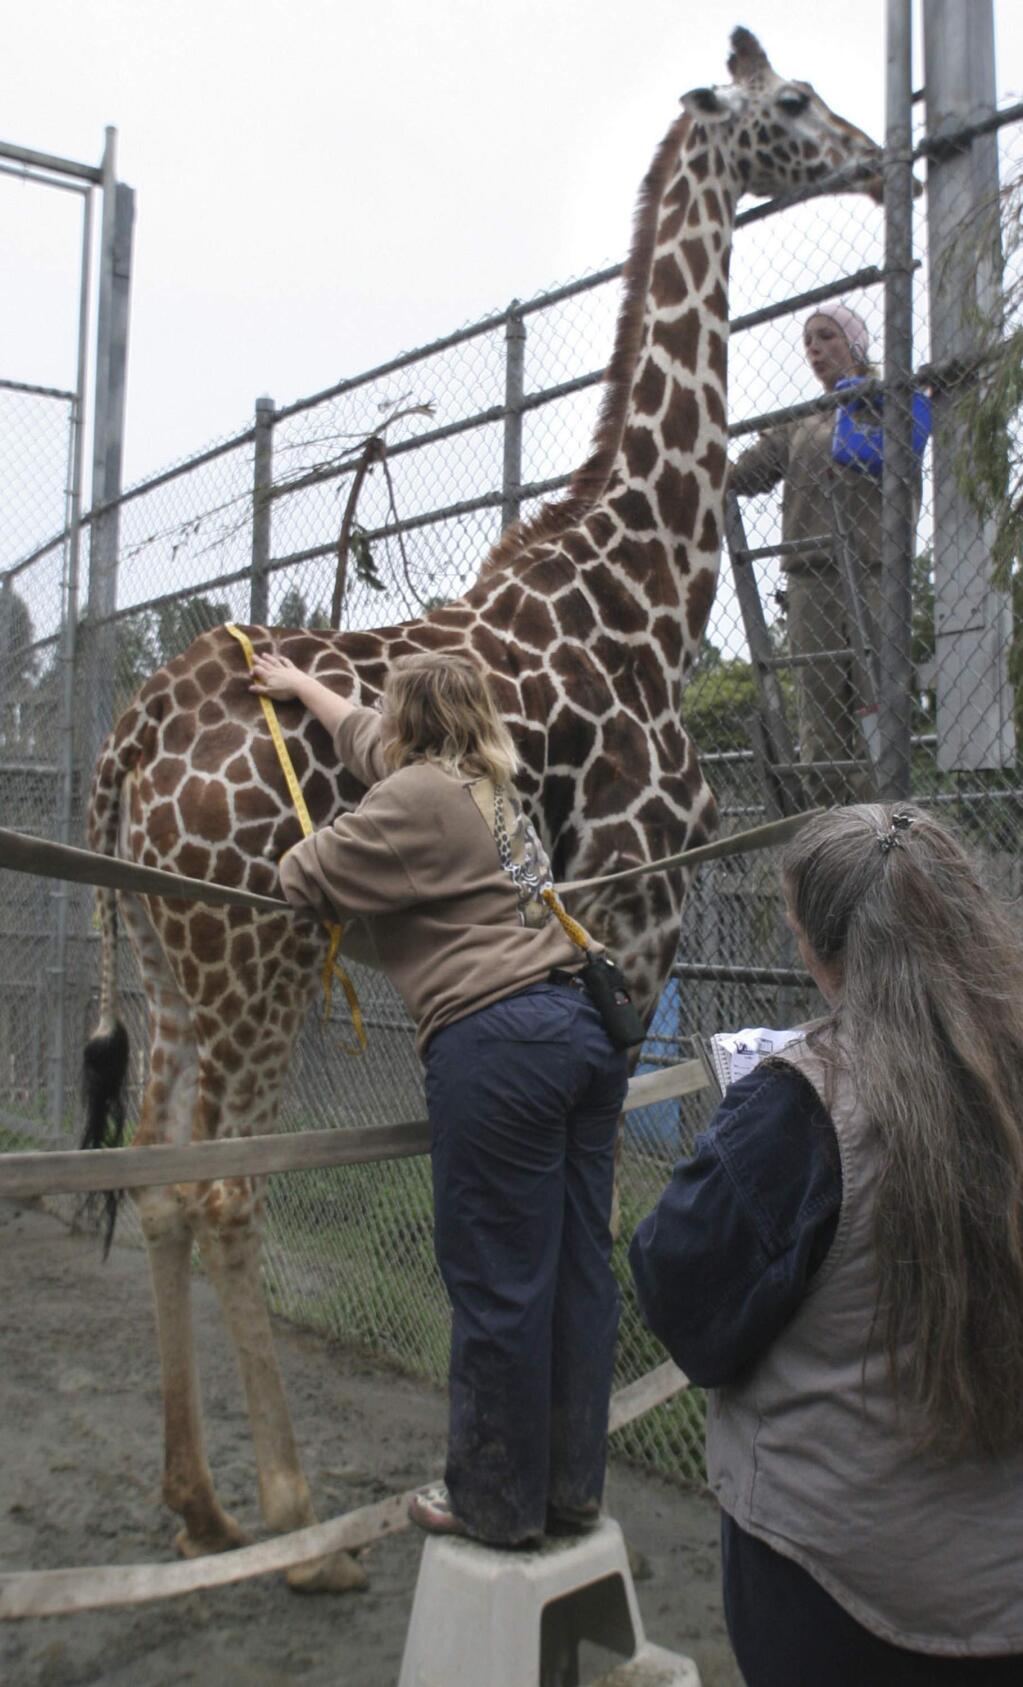 FILE - In this Jan. 25, 2008 file photo, Tiki the giraffe is gets fitted for a brand new winter coat at the Oakland Zoo, in Oakland, Calif. Tiki, one of the oldest living giraffes has died in captivity. Vets at the zoo said on Nov. 2, 2017, they euthanized 28-year-old Tiki to spare her further pain from health issues that included arthritis. (Laura A. Oda/Bay Area News Group via AP)